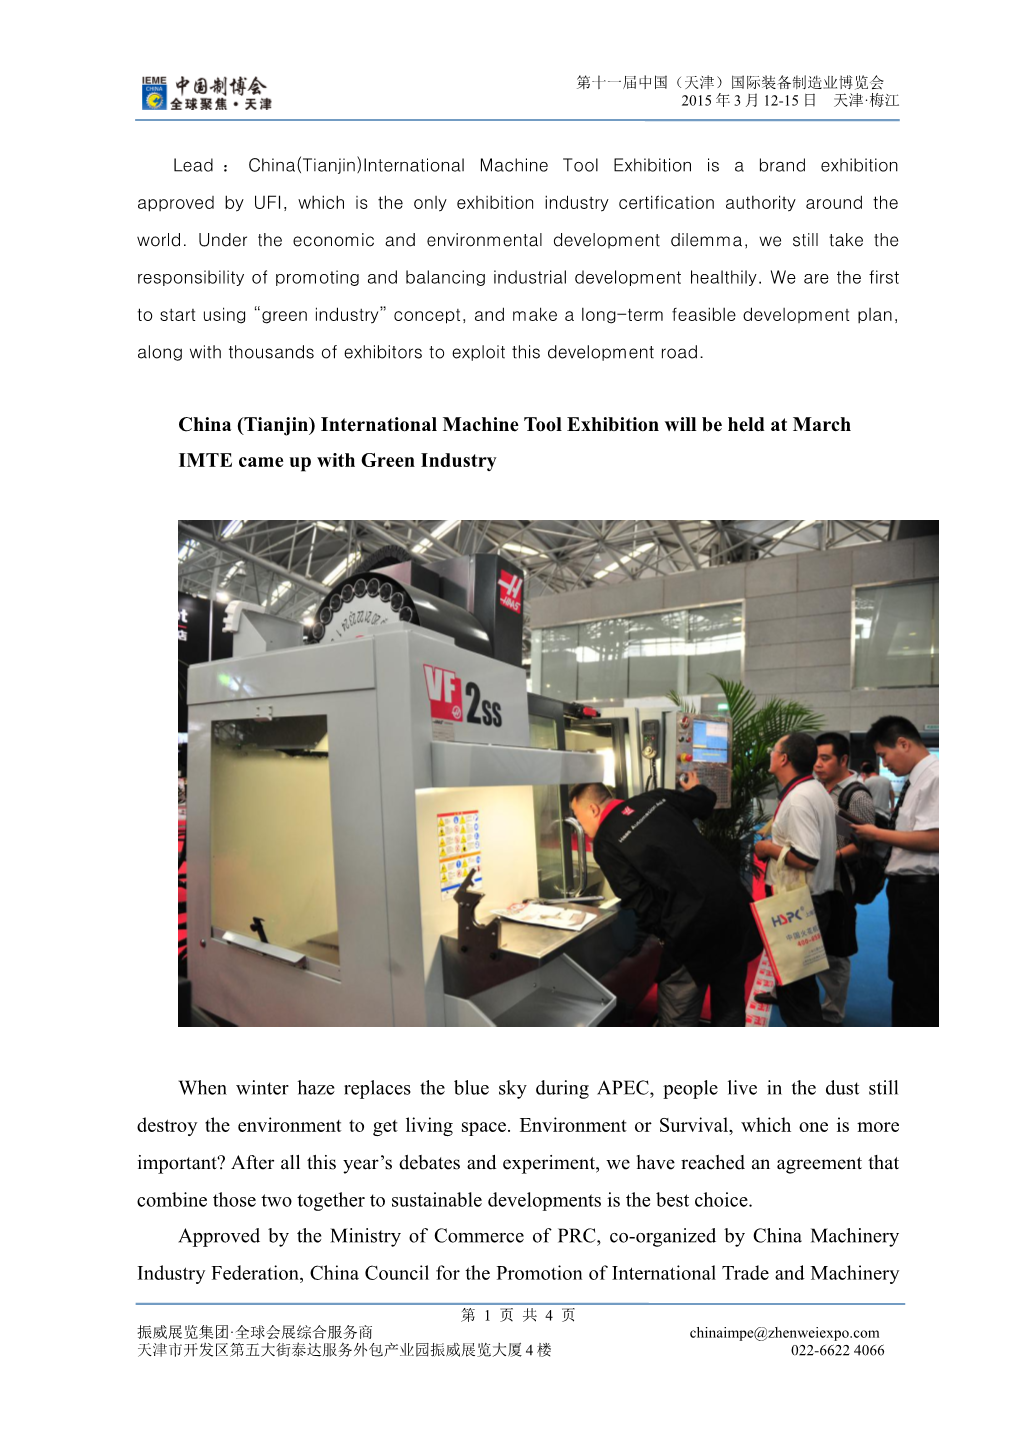 China (Tianjin) International Machine Tool Exhibition Will Be Held at March